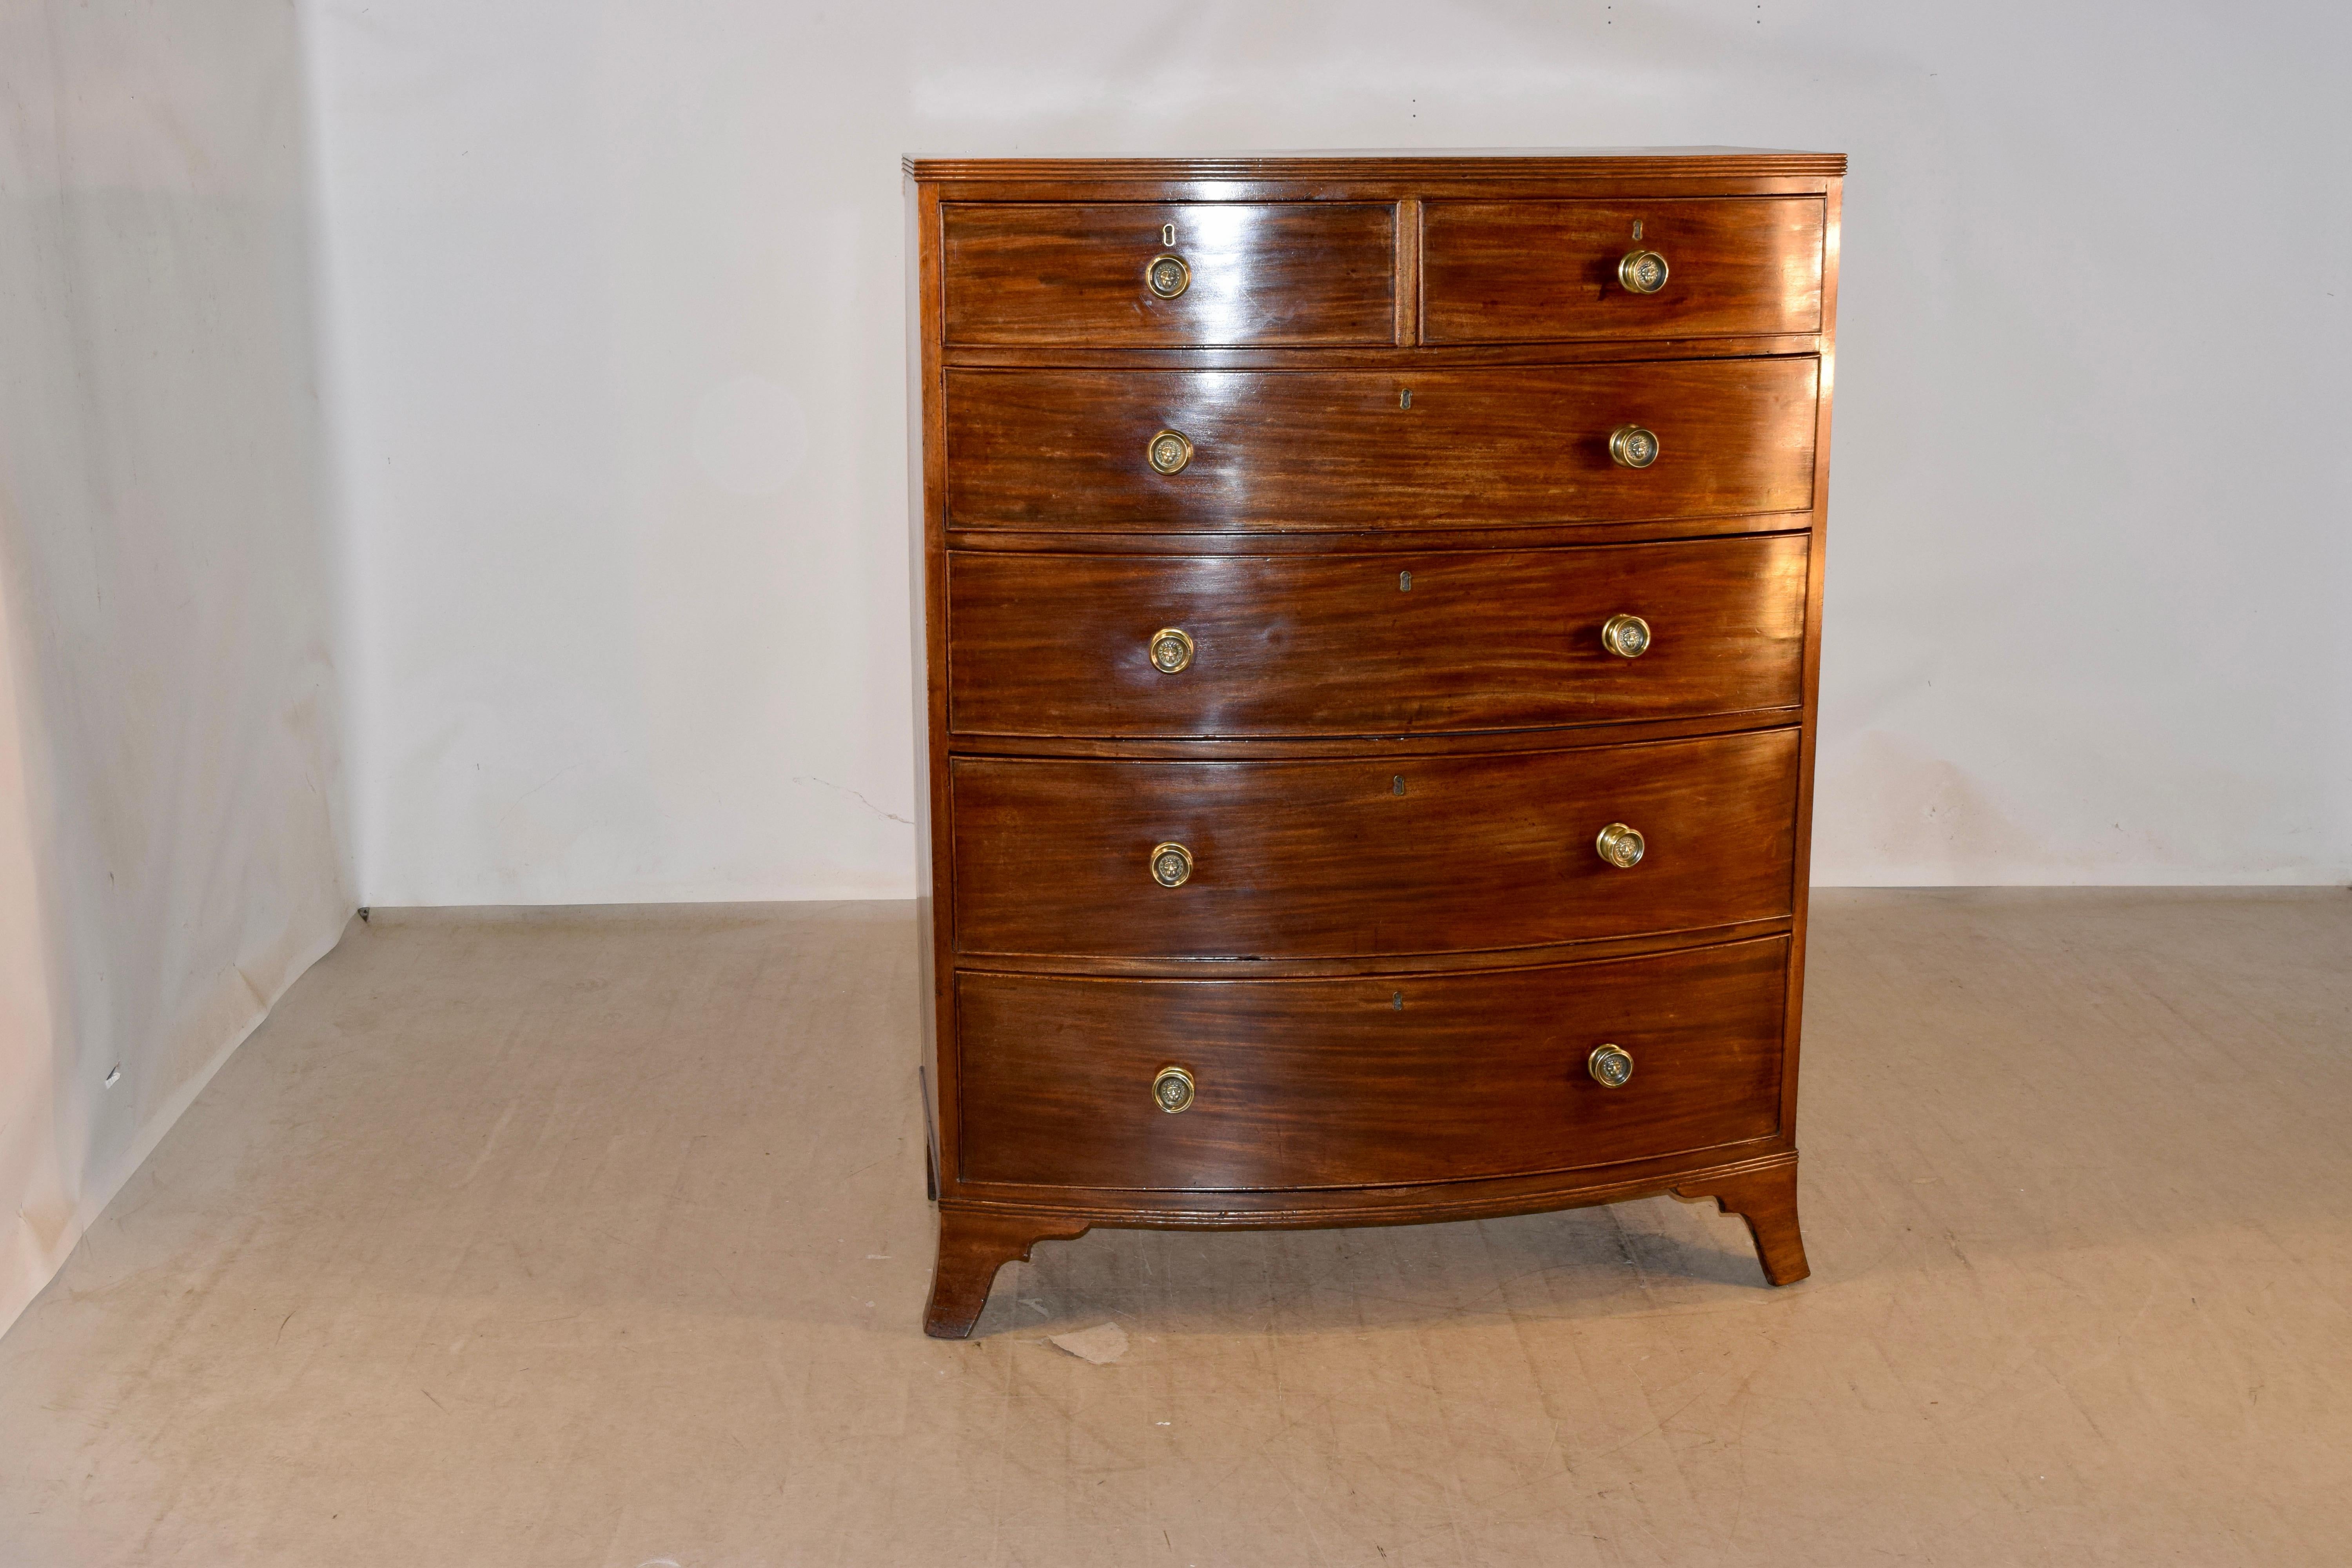 19th century tall mahogany chest of drawers from England with wonderful graining and a molded edge around the top, following down to two drawers over four drawers, all with beaded edges. The sides are simple and the case is supported on bracket feet.